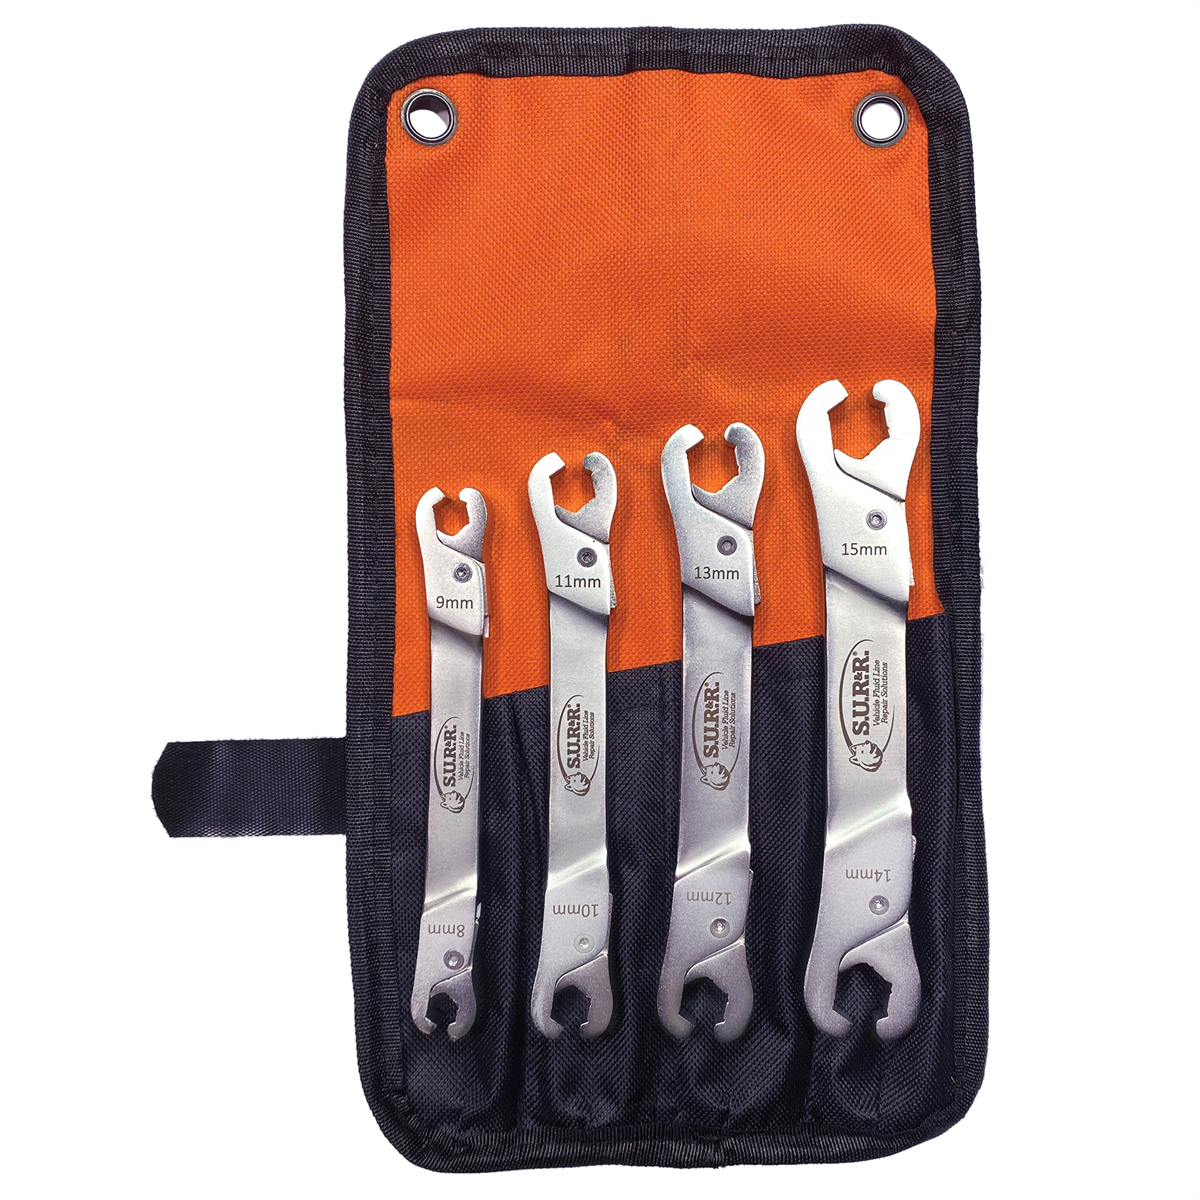 4-Piece set of versatile line wrenches featuring u...